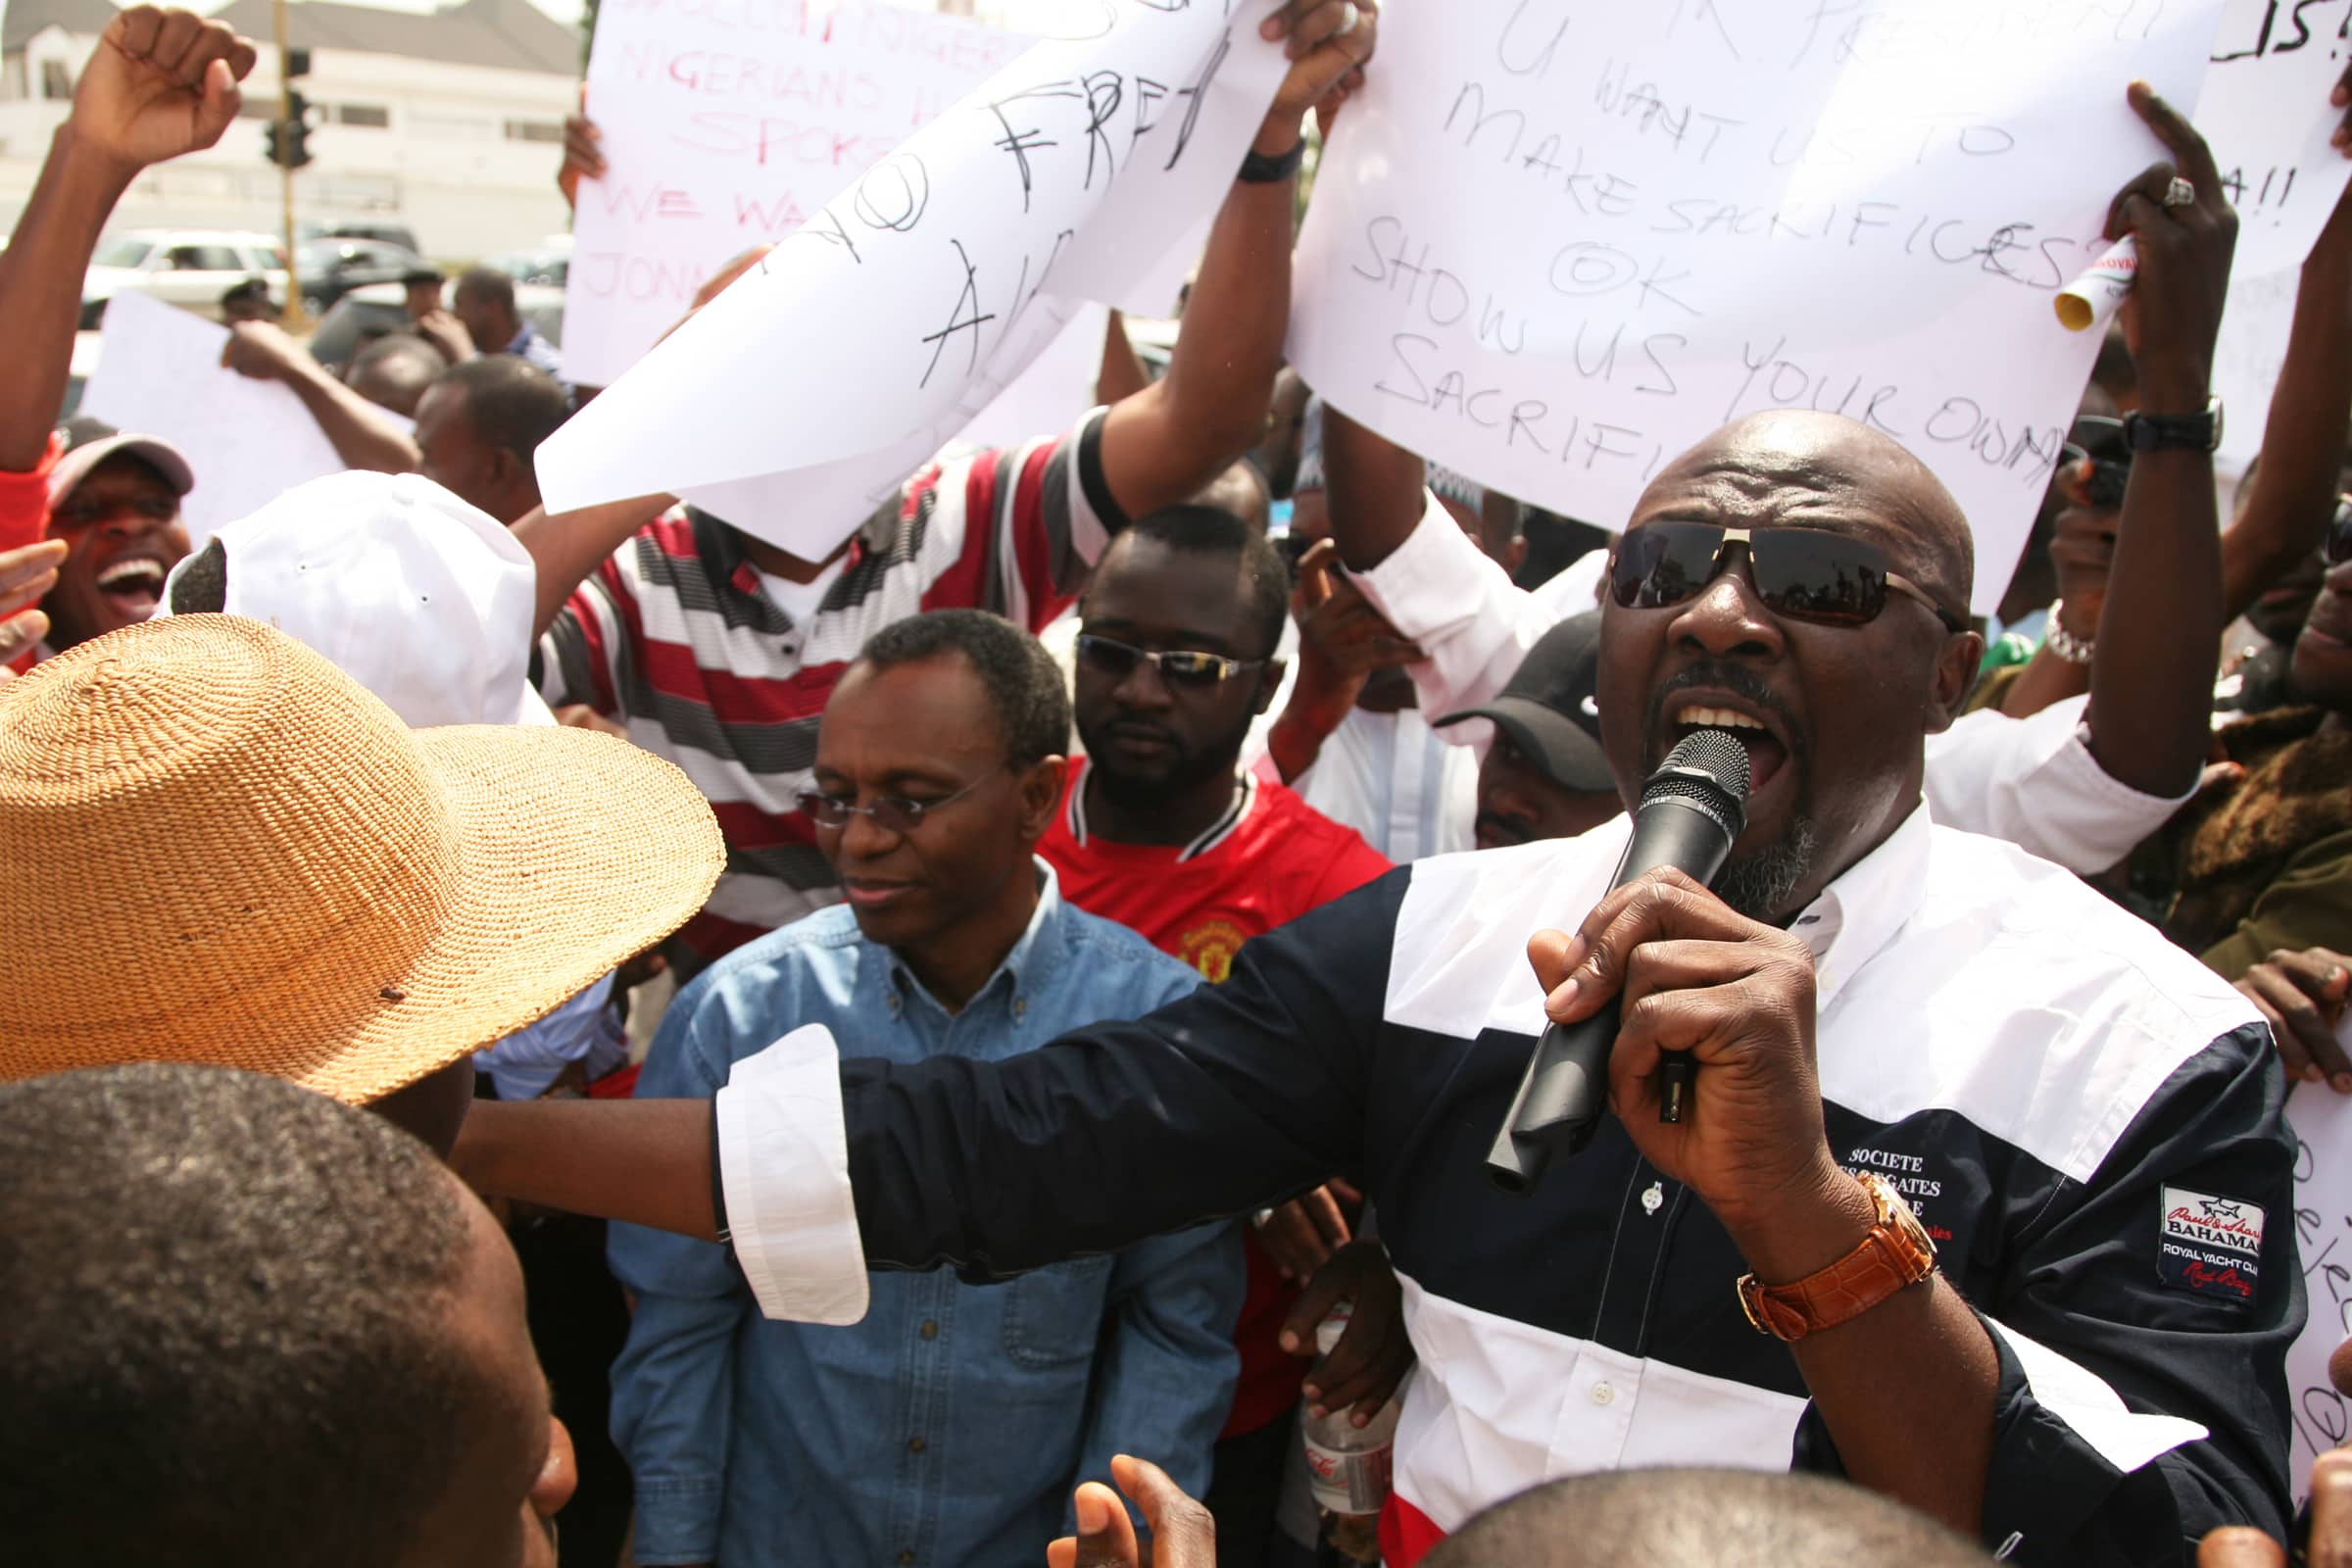 Former House of Representatives member Dino Melaye addresses youths protesting against the removal of fuel subsidies by the Nigerian government, 6 January 2012., Ayemoba Godswill/Demotix